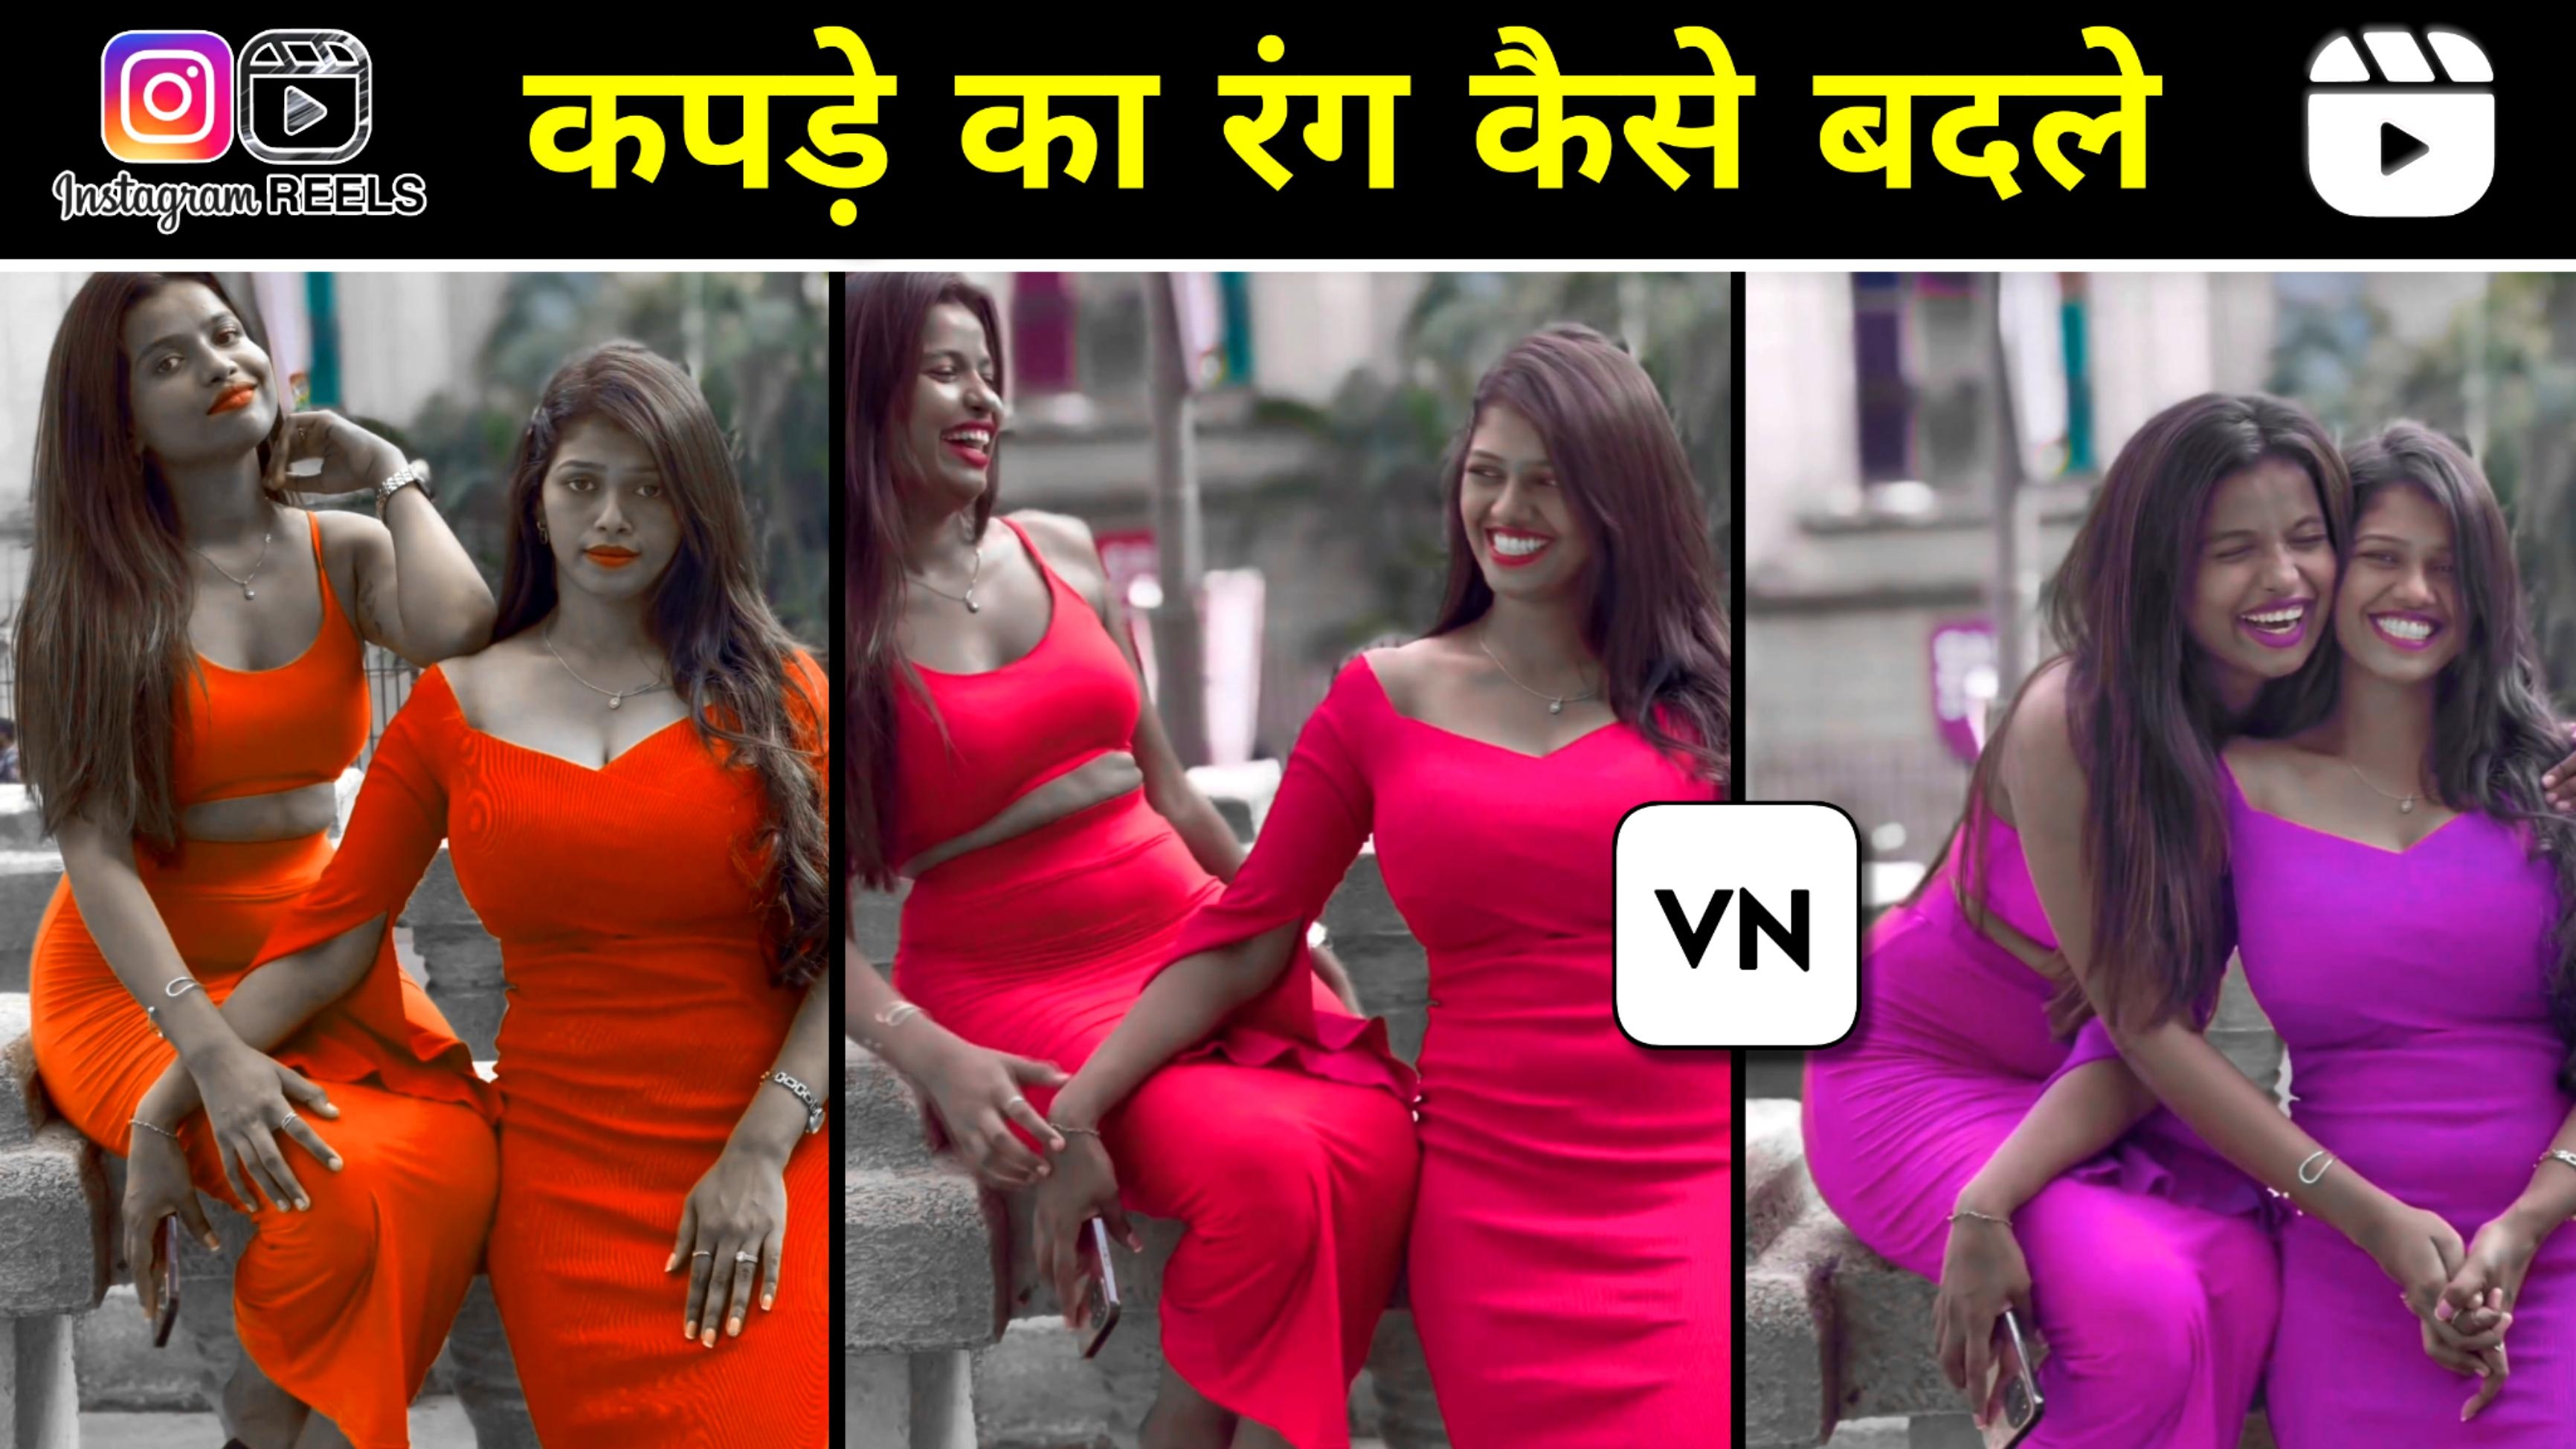 Black Colour Wow || Orange Colour Wow || Just Looking Like A Wow || Clothe Colour Change Editing